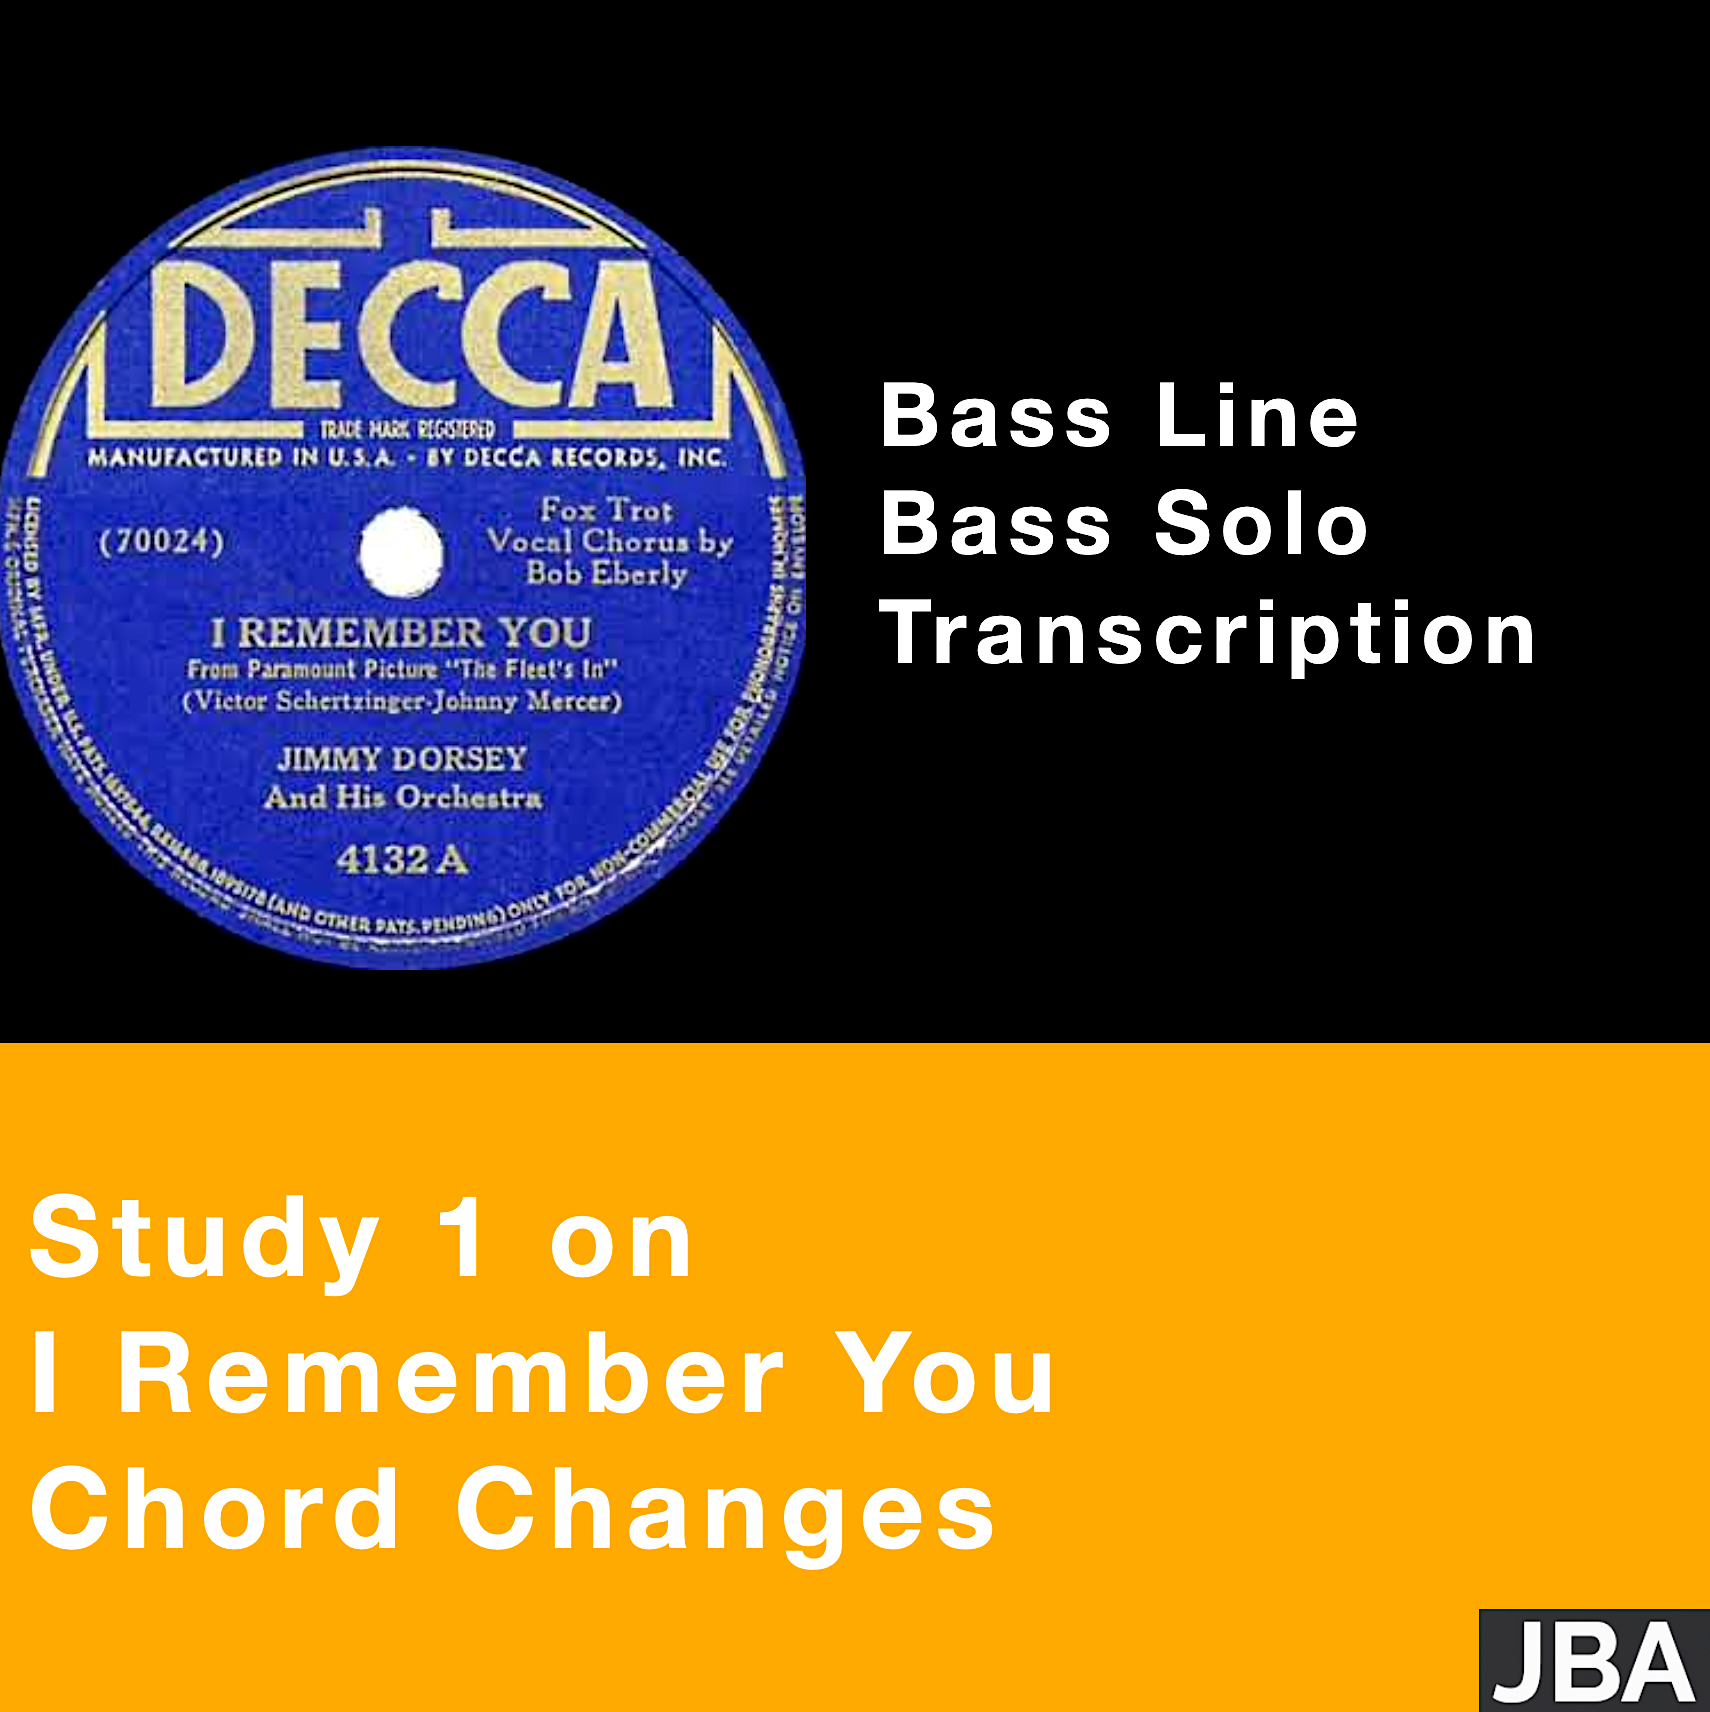 Study 1 on I Remember You chord changes